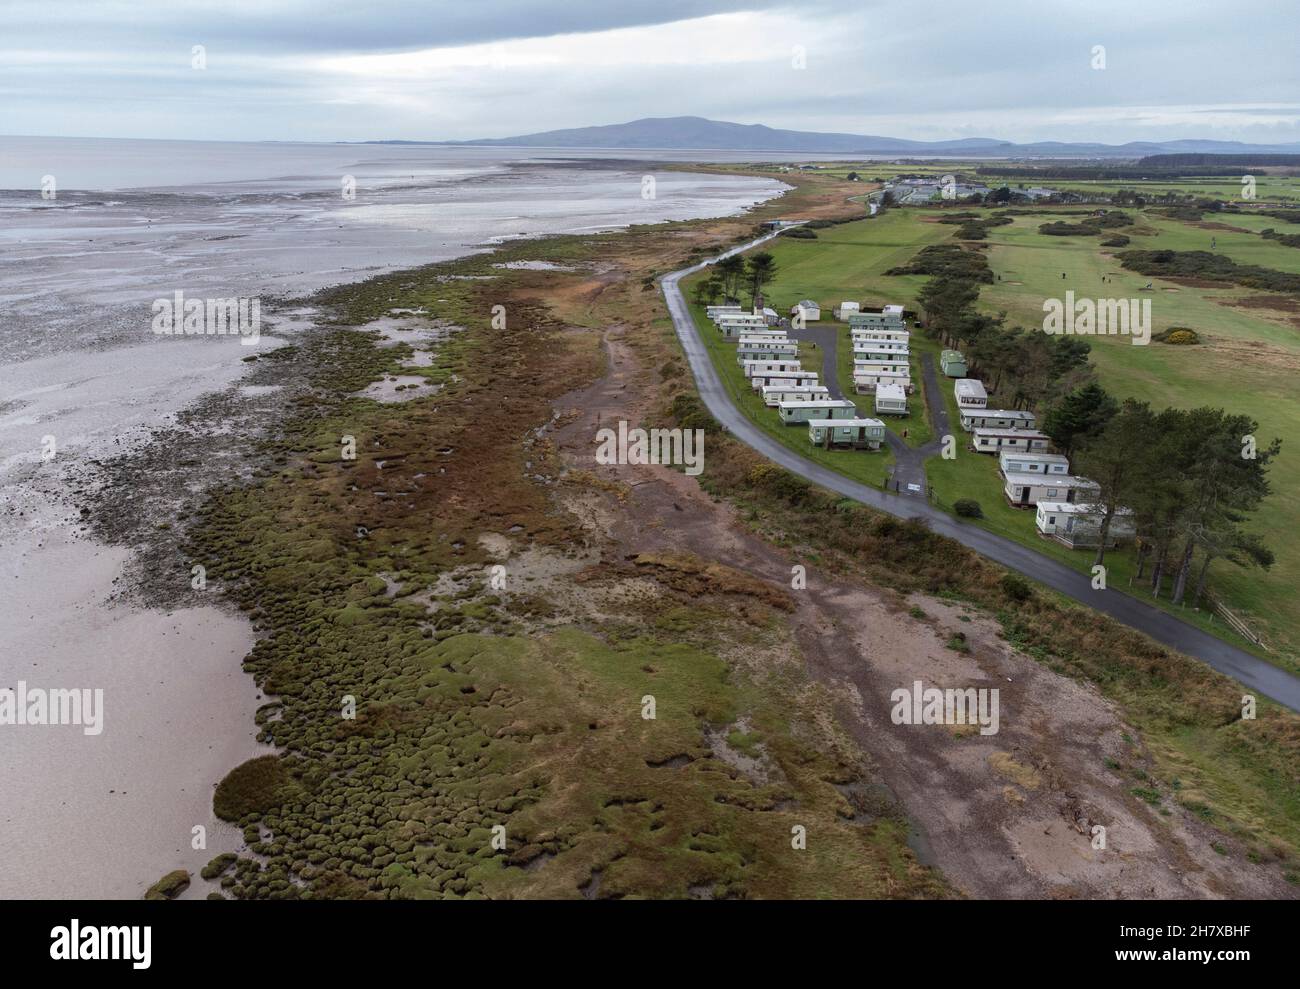 An aerial view of the Solway Firth coast line at Powfoot, Dumfries and Galloway, Scotland showing a coast road and a holiday caravan park. Stock Photo